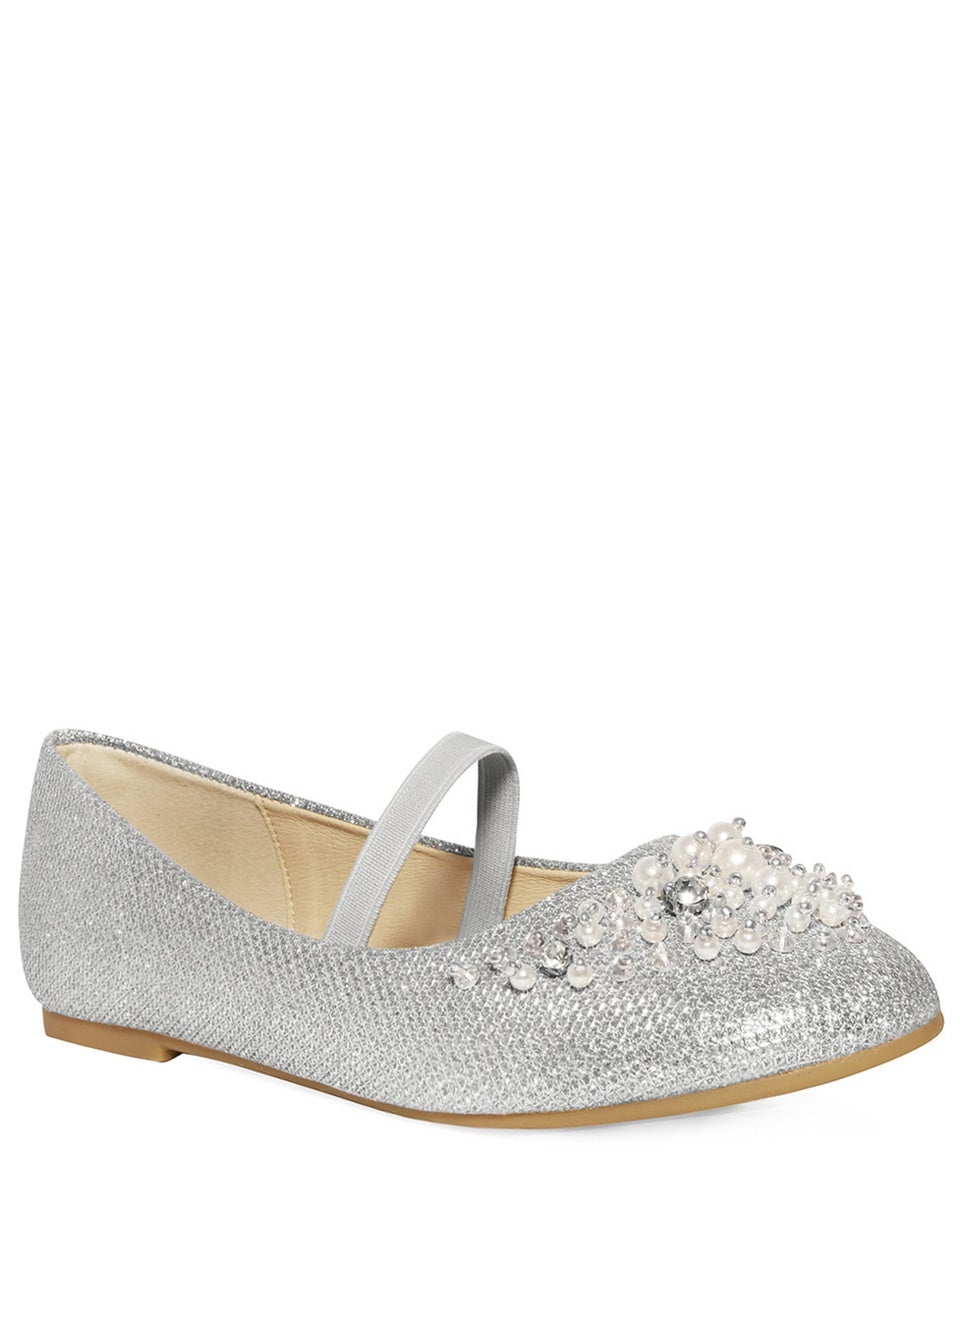 Where's That From Silver Libbie Kids Diamante Embellished Platform Shoes